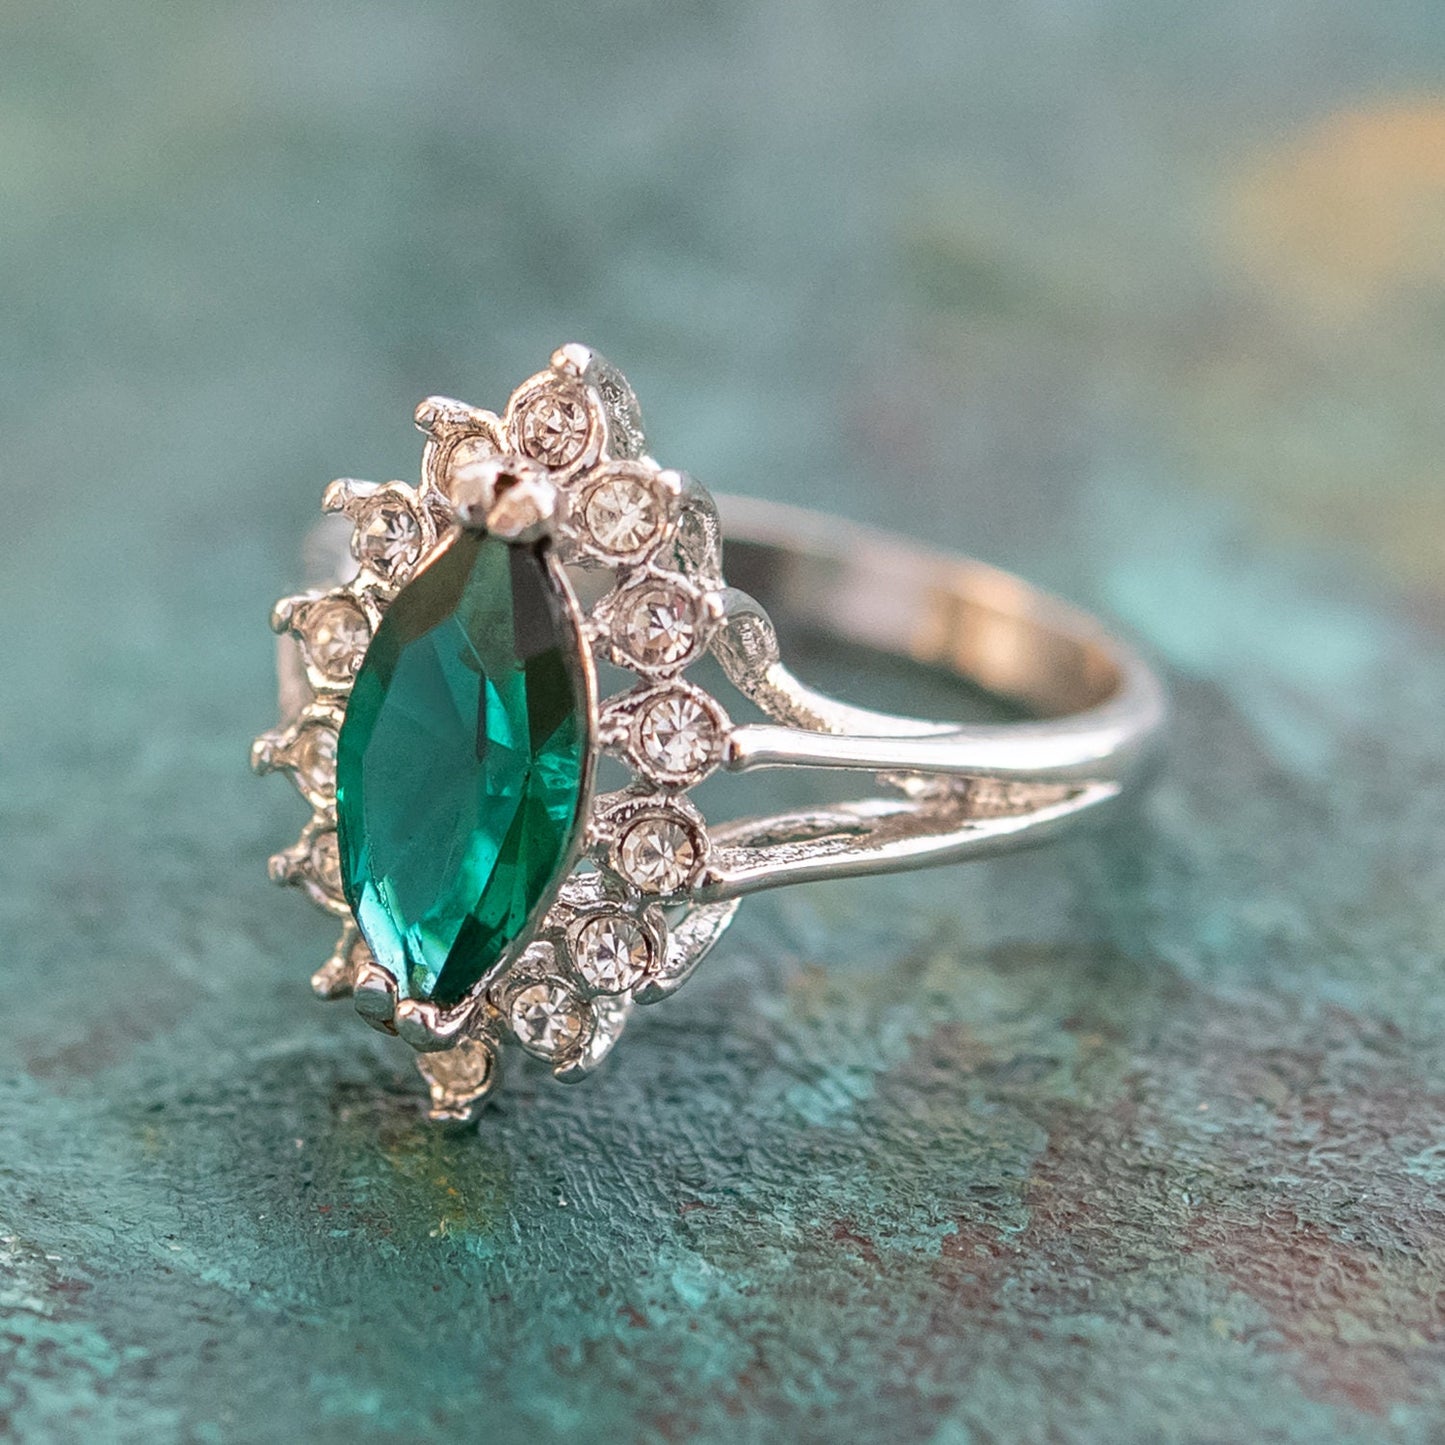 Vintage Ring Emerald and Clear Swarovski Crystals 18k White Gold Silver Ring May Birthstone R1891 - Limited Stock - Never Worn